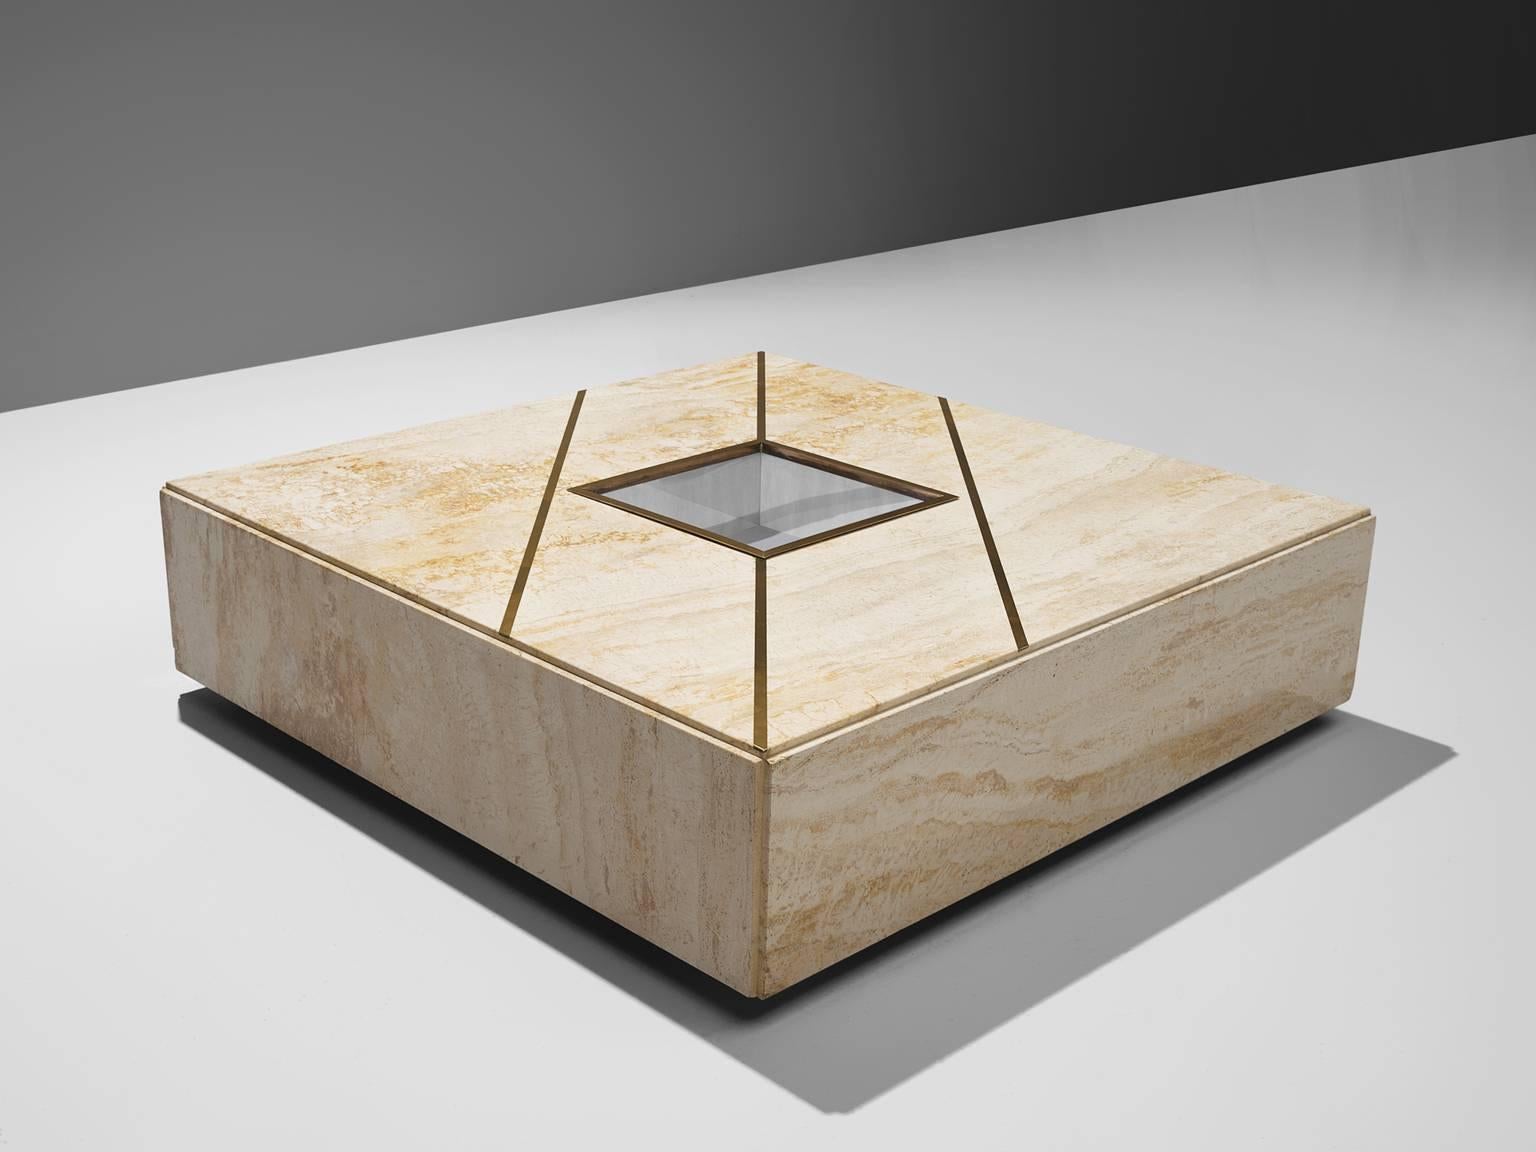 Coffee table, travertine and brass, 1970s, Italy.

This cocktail table is designed in the style of Willy Rizzo. The coffee table features particular design aesthetics of Postmodern Italian design. It features slick and clean look thanks to the